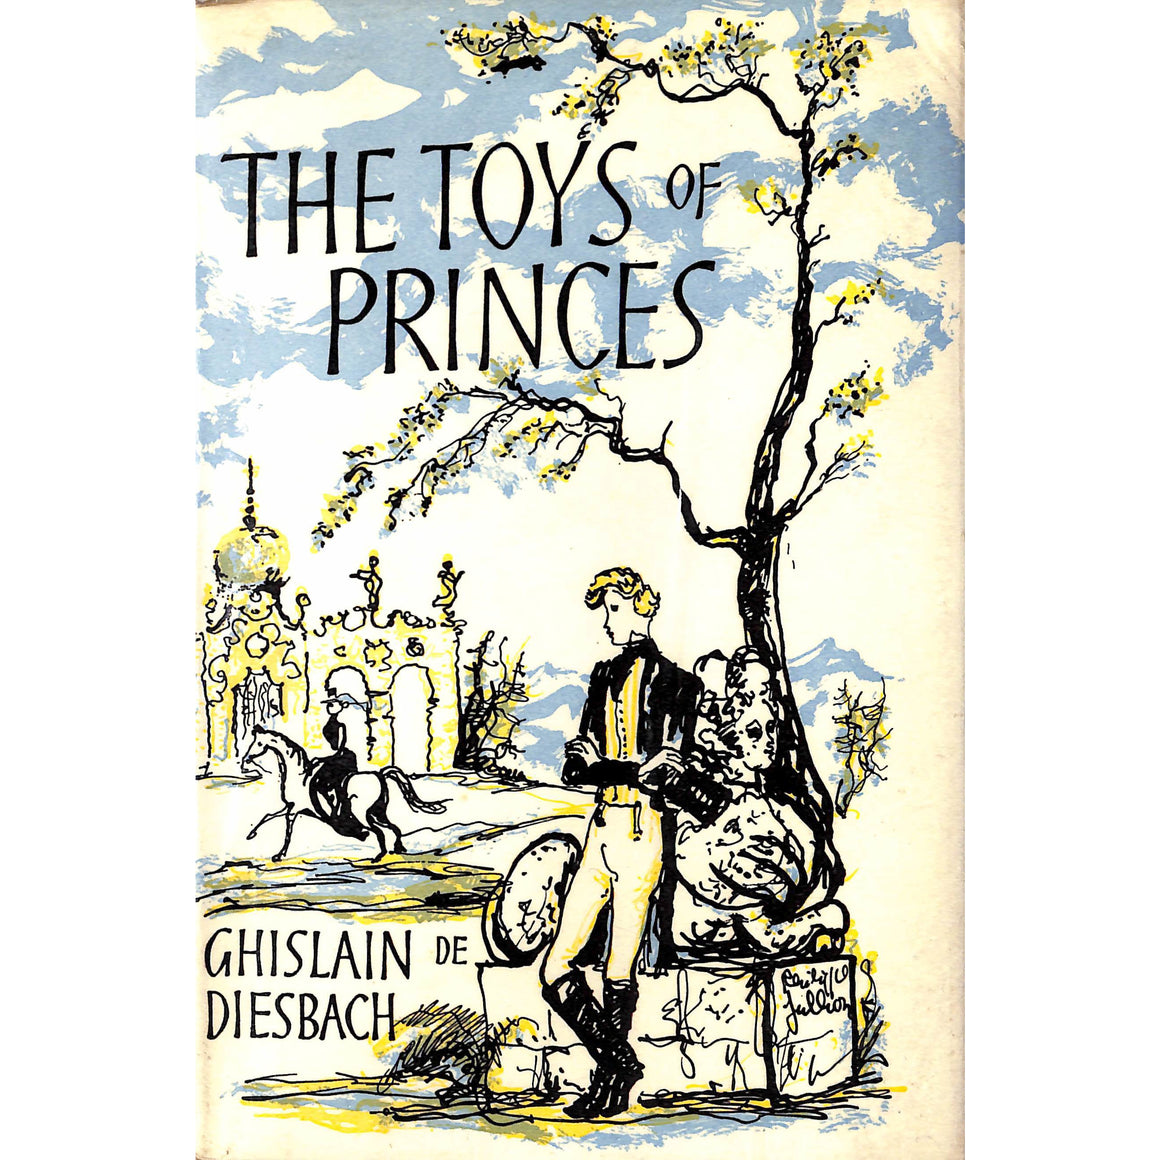 The Toys of Princes